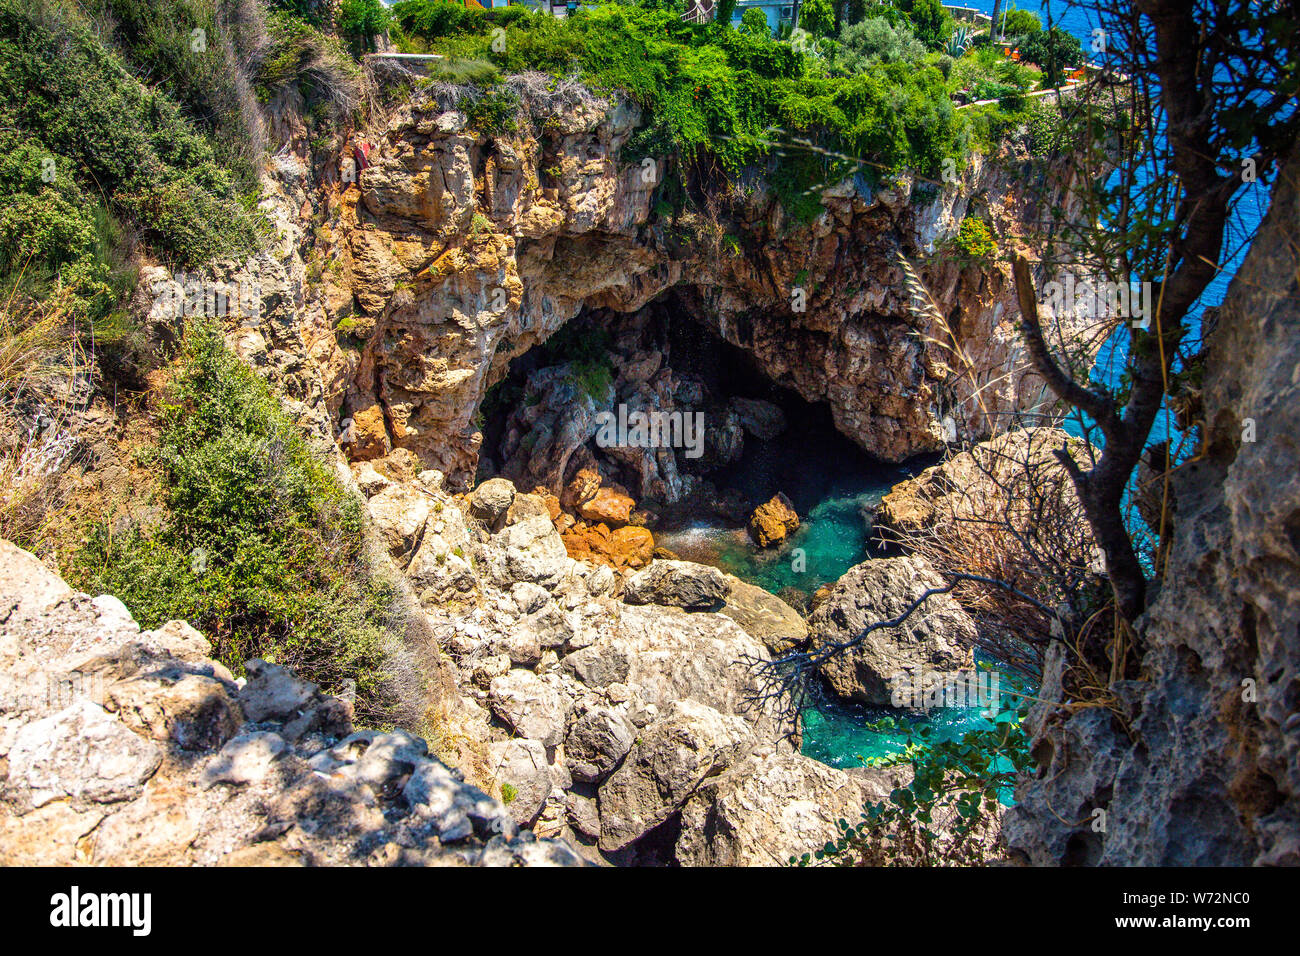 Top view of the rock and blue sea water. In the rock there is a large cave which is flooded with sea water. Stock Photo